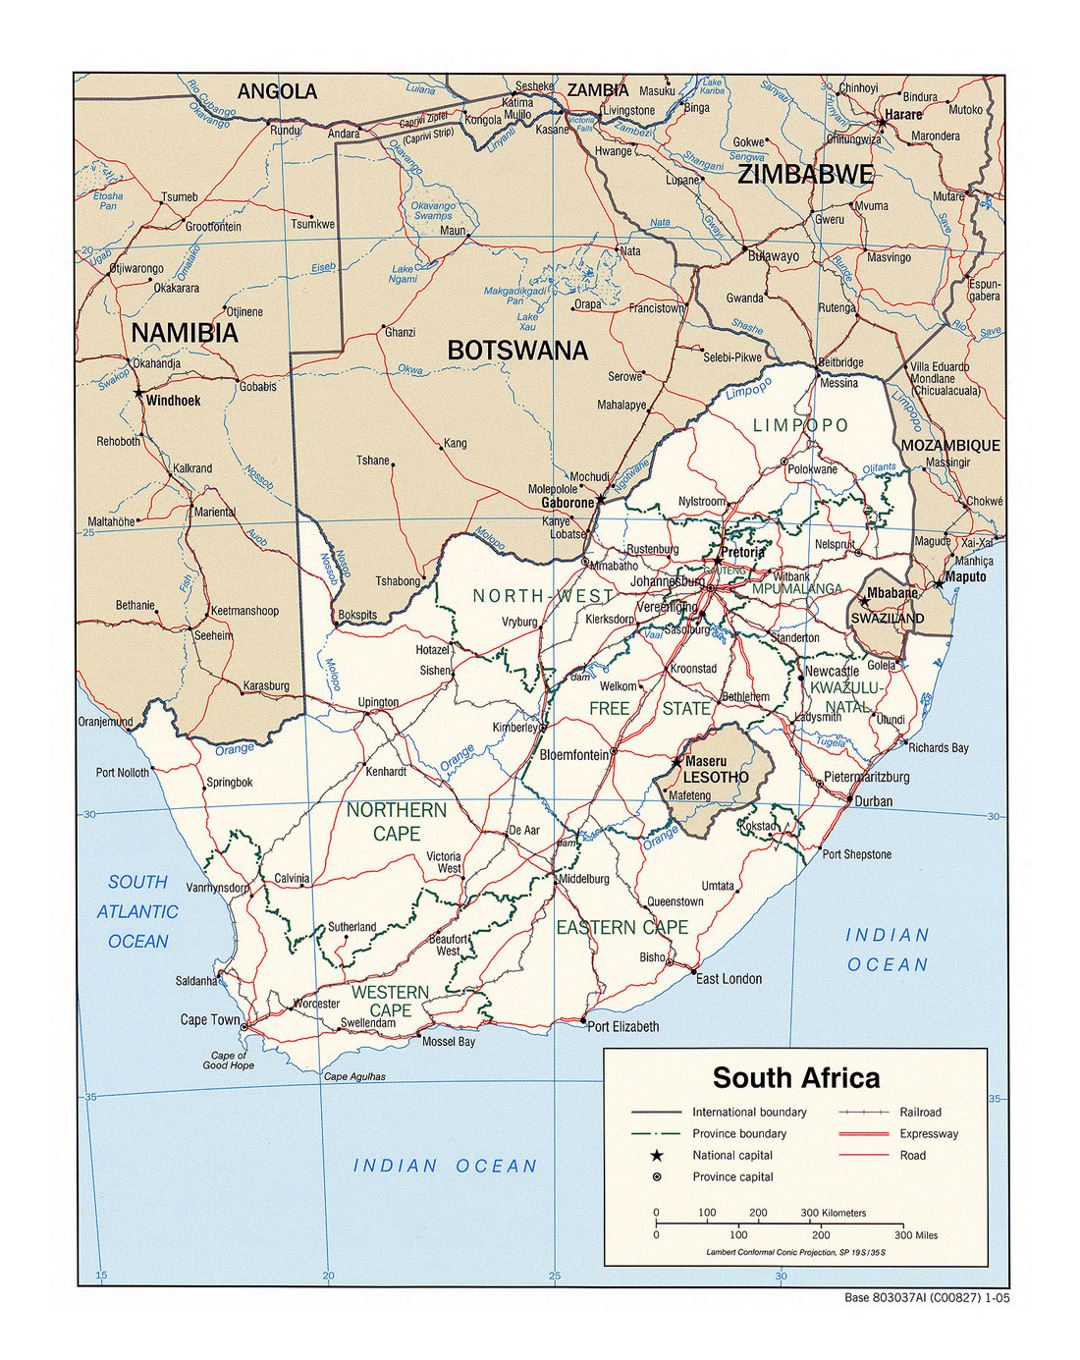 Detailed political and administrative map of South Africa with roads, railroads and major cities - 2005